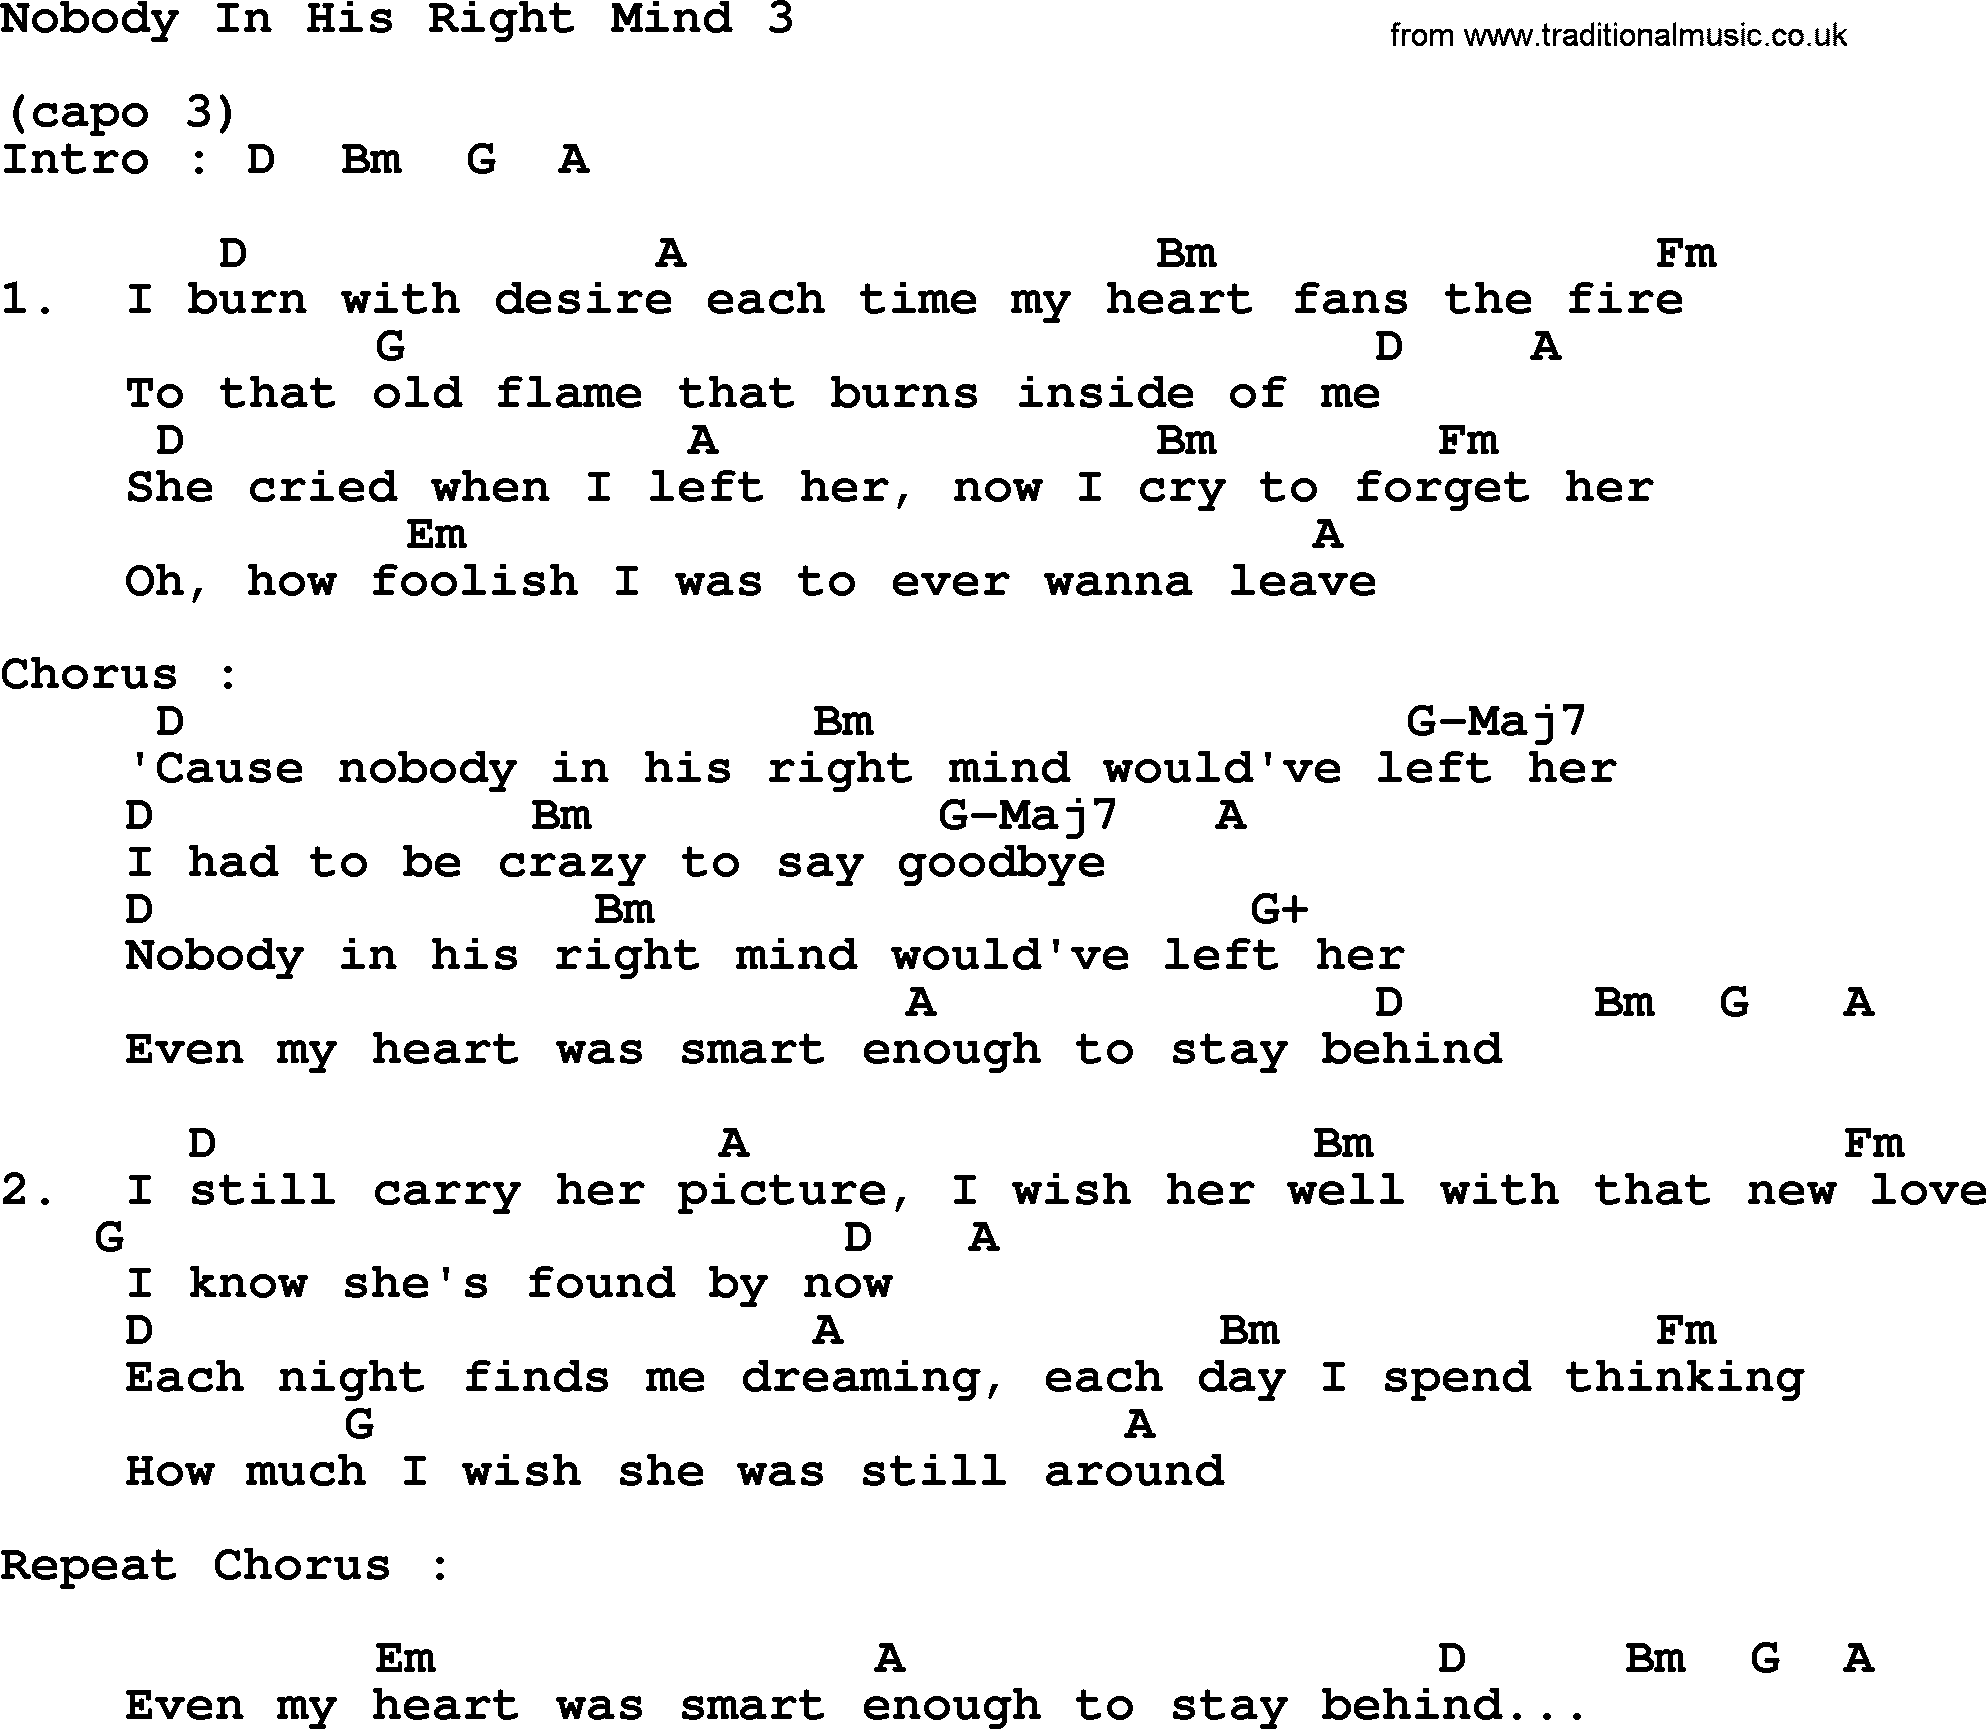 George Strait song: Nobody In His Right Mind 3, lyrics and chords